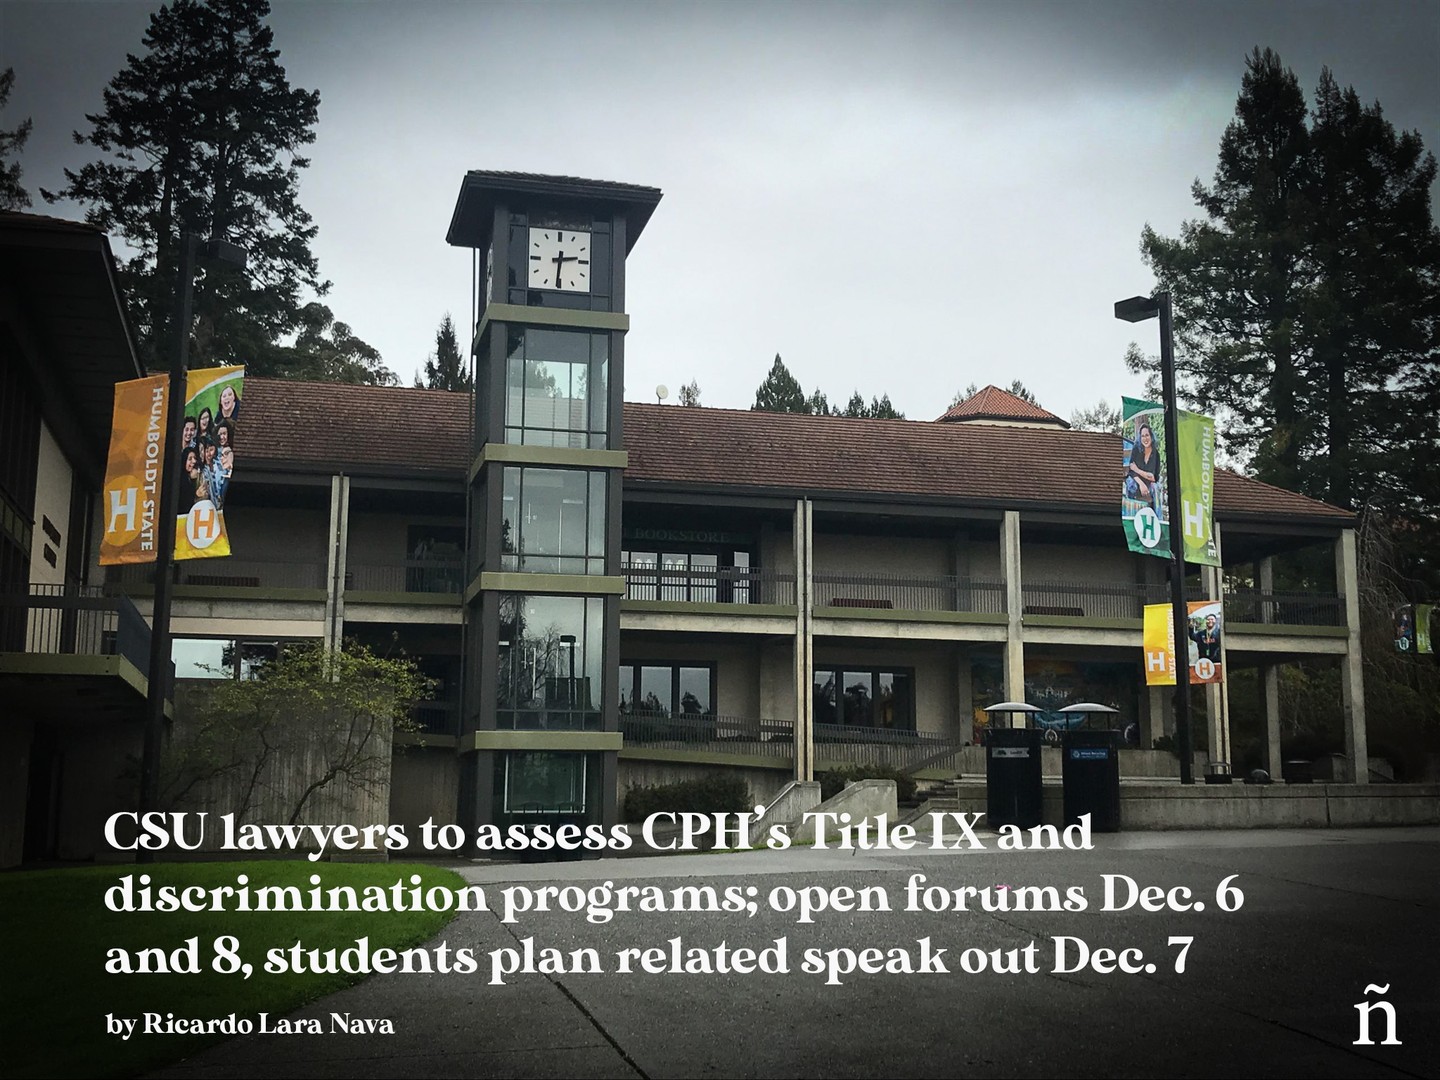 California State University is currently conducting a system wide assessment of the 23 campuses implementation of its Title IX & Discrimination, Harassment, and Retaliation (DHR) programs with ​​international law firm Cozen O’Connor. 

An open forum with the Cozen team for faculty and staff will be held on Tuesday Dec. 6 from 3:45 until 4:45 p.m. in the Great Hall above the College Creek Marketplace. 
A separate open forum for students will be held on Thursday, Dec. 8, 11 a.m. at the same location. These forums are restricted for faculty, staff and students in their respective days. No members from CPH Administration will be present during these open forums.

On Dec. 7, from 11 a.m. to 1 p.m. students will be holding a speak-out at the Cal Poly Humboldt SAC Quad in solidarity with survivors of sexualized violence on campus. They will also be brainstorming how a survivor center may be implemented on campus in response to the community outrage at the lack of survivor resources.
Learn more about these events and why they are happening by clicking on our linktree in the description. 

Editors note: The original post was removed to include a new image and to add in detail of other open forums. 

by Ricardo Lara Nava
 

#ellenadornews #calpolyhumboldt #titleix #humboldtcounty #arcata #CSU